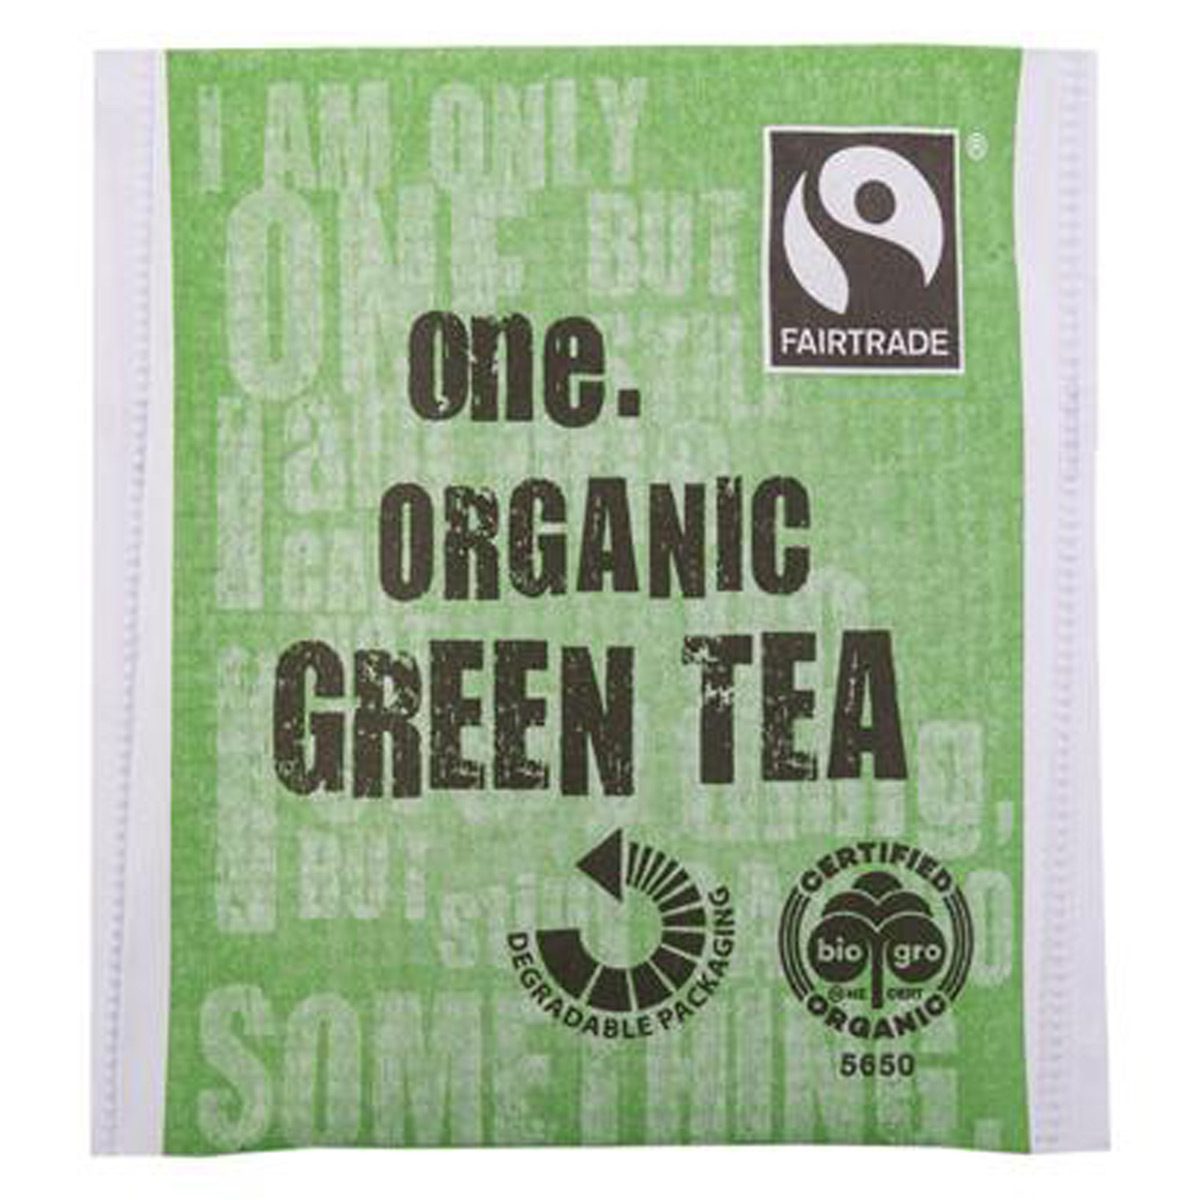 consumables-hospitality-beverage-food-one-fairtrade-green-teabags-x200pk-certified-fairtrade-organic-degradable-paper-cotton-packaging-make-world-better-place-plastic-foil-free-vjs-distributors-ONEGT